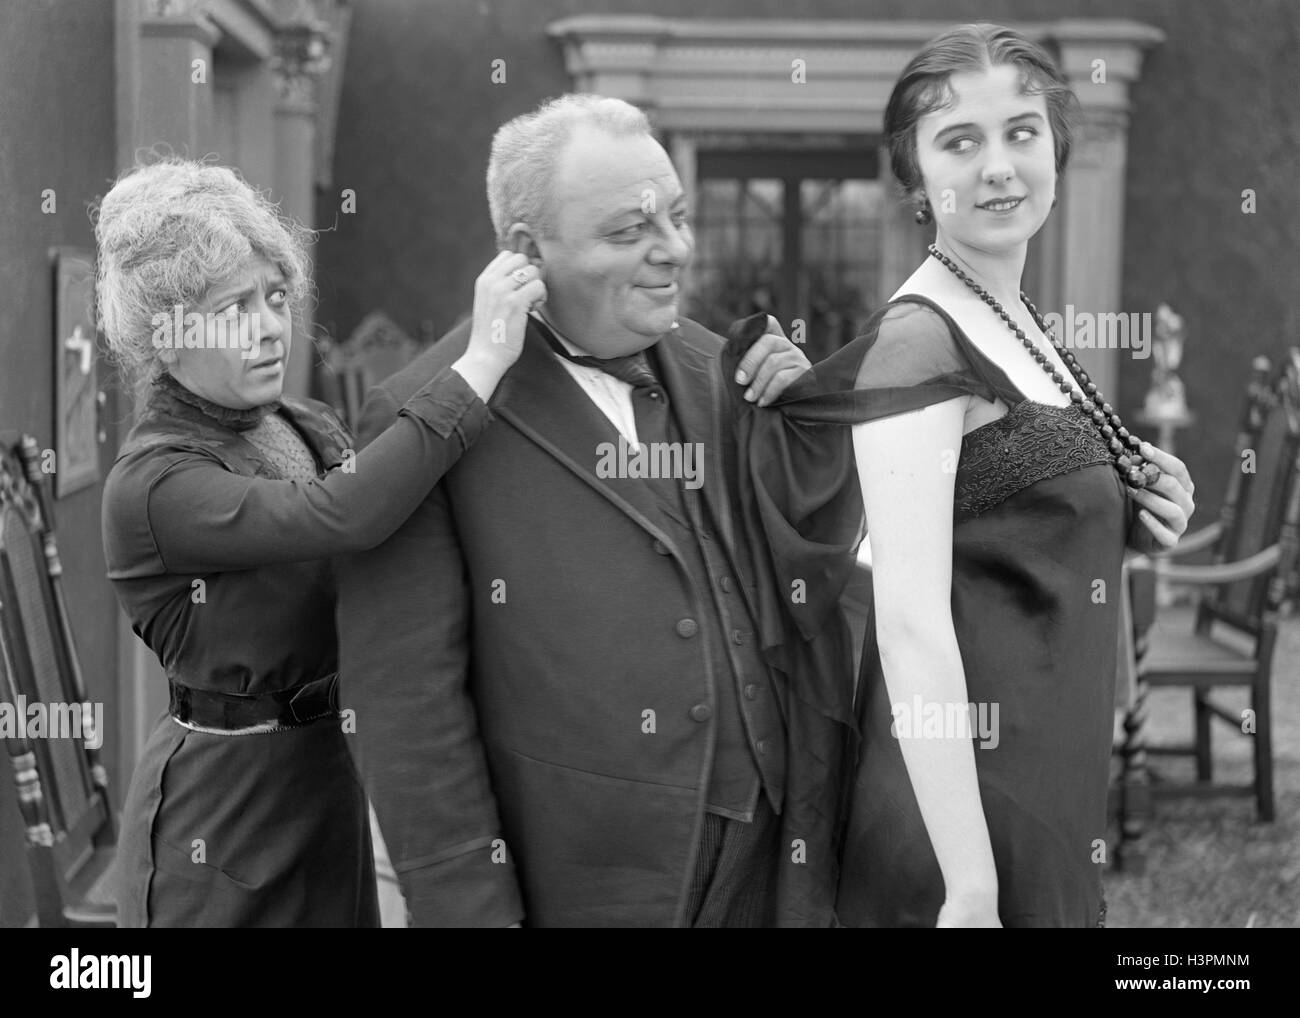 1910s 1920s OLDER SMILING MAN TUGGING ON YOUNG WOMAN’S DRESS WHILE WIFE TUGS ON MAN’S EAR SILENT MOVIE STILL Stock Photo